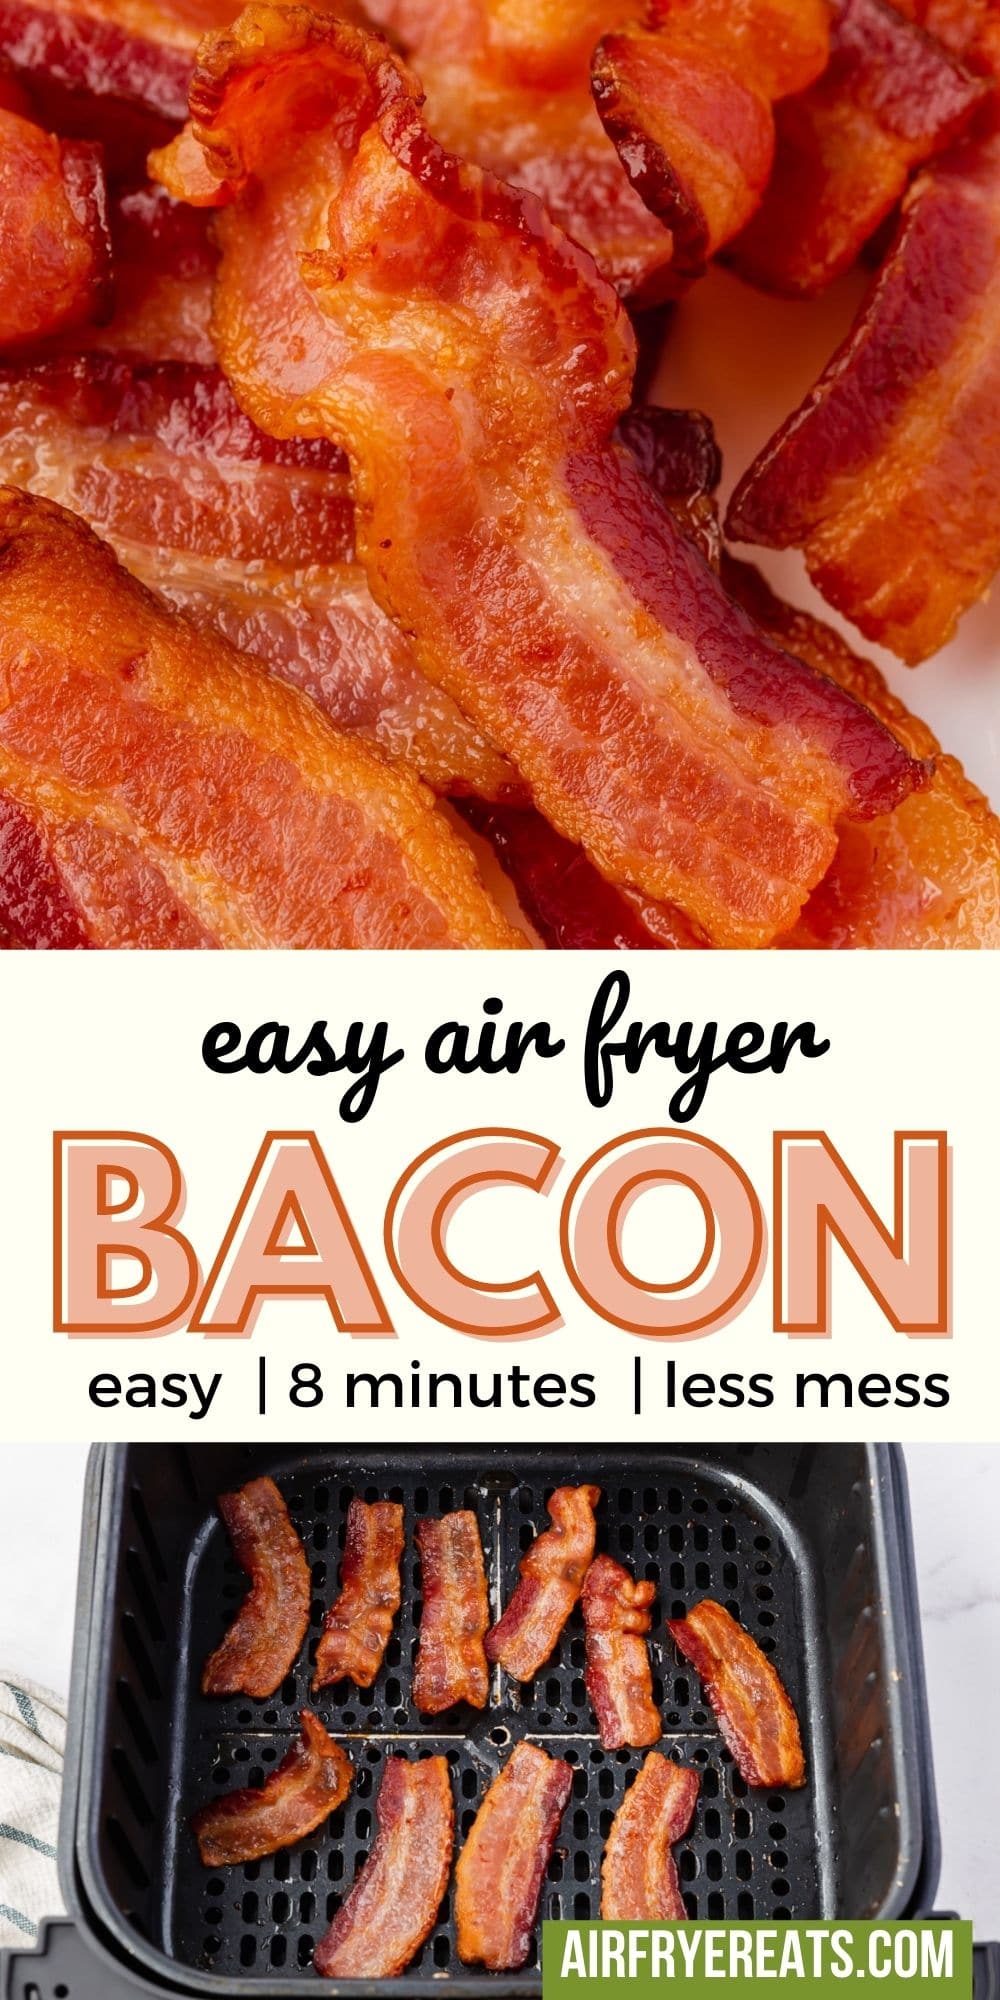 images of air fryer bacon with text in between them that says, Easy air fryer bacon